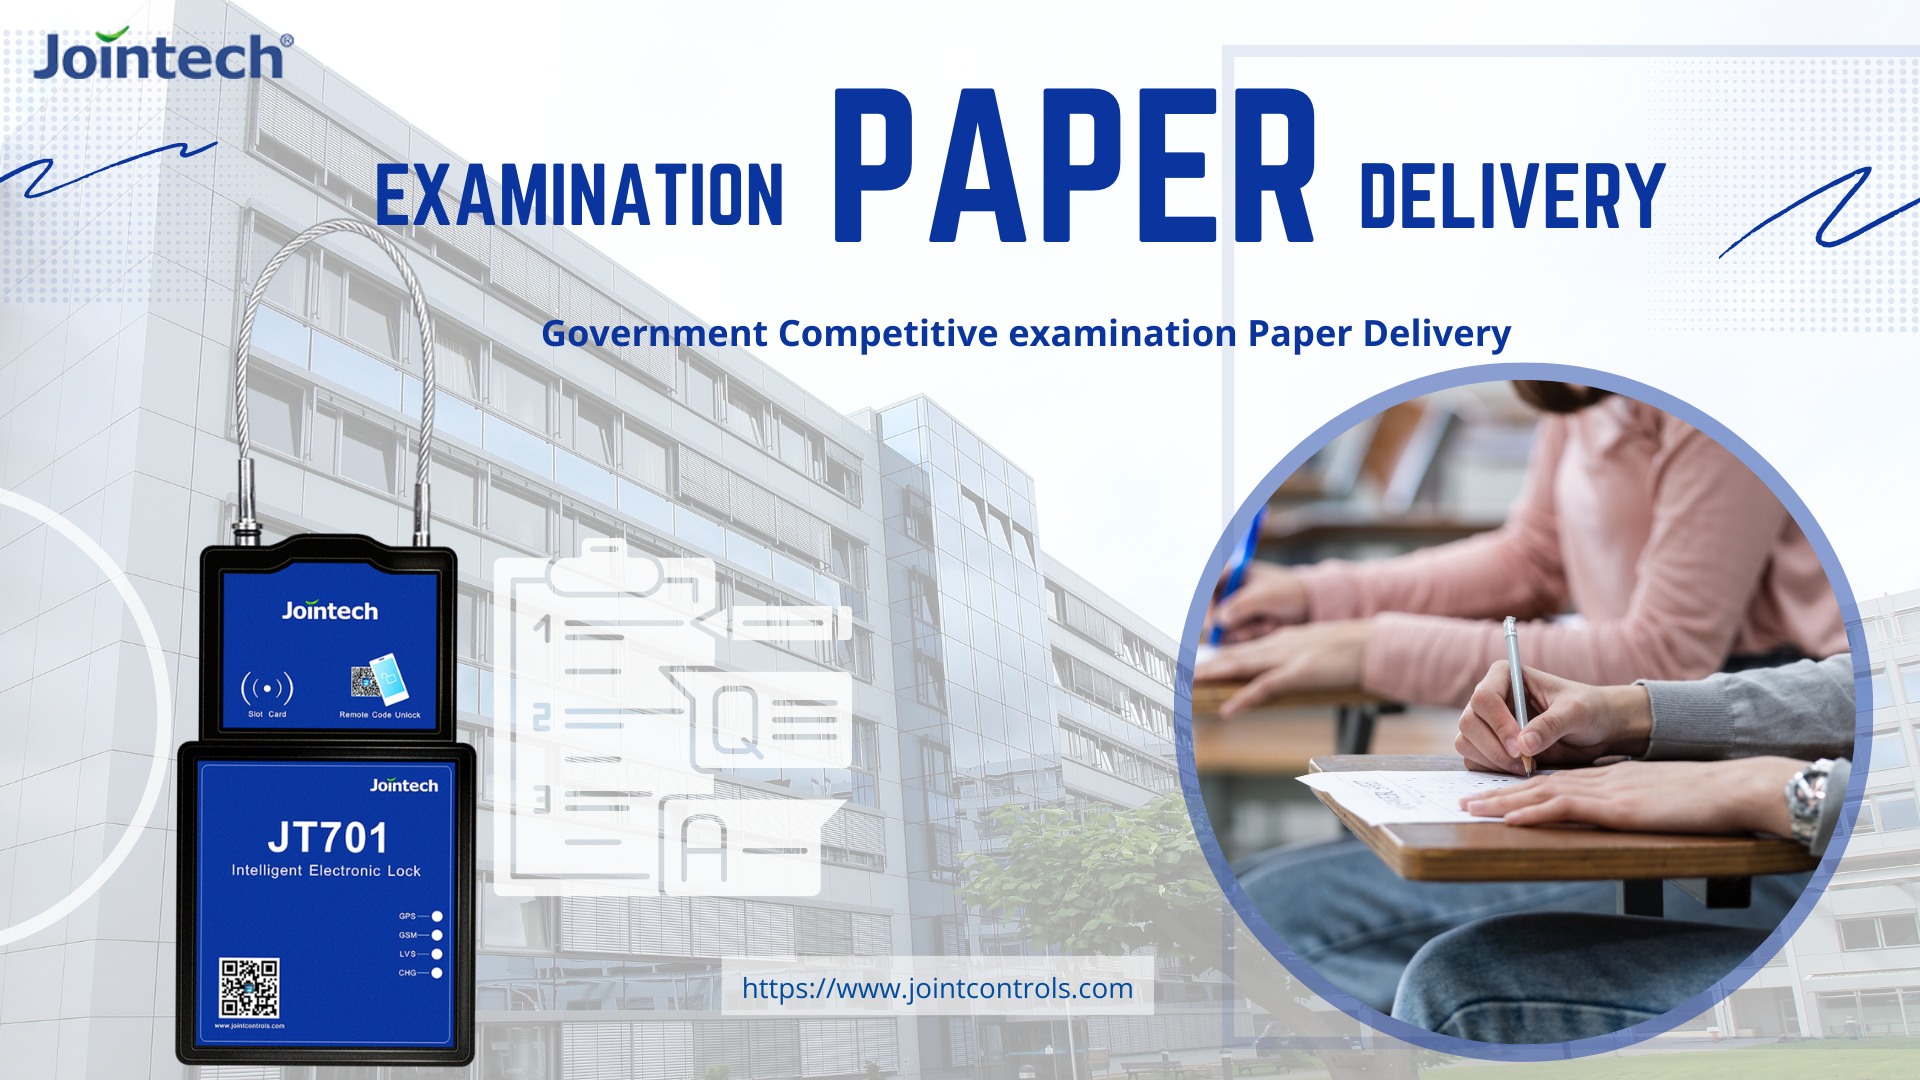 Government Competitive examination Paper Delivery